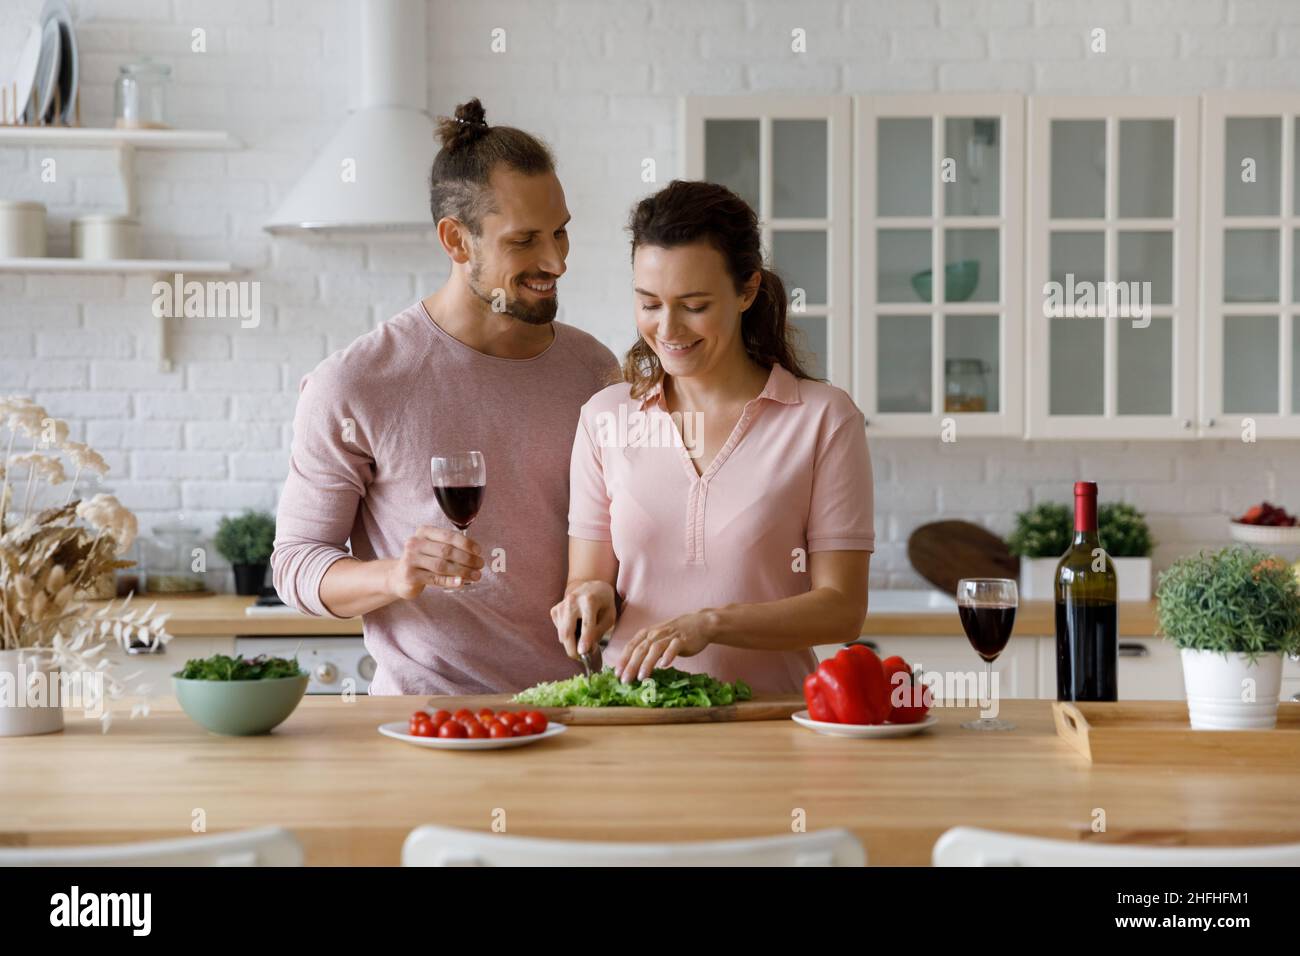 Affectionate young man watching wife preparing food. Stock Photo